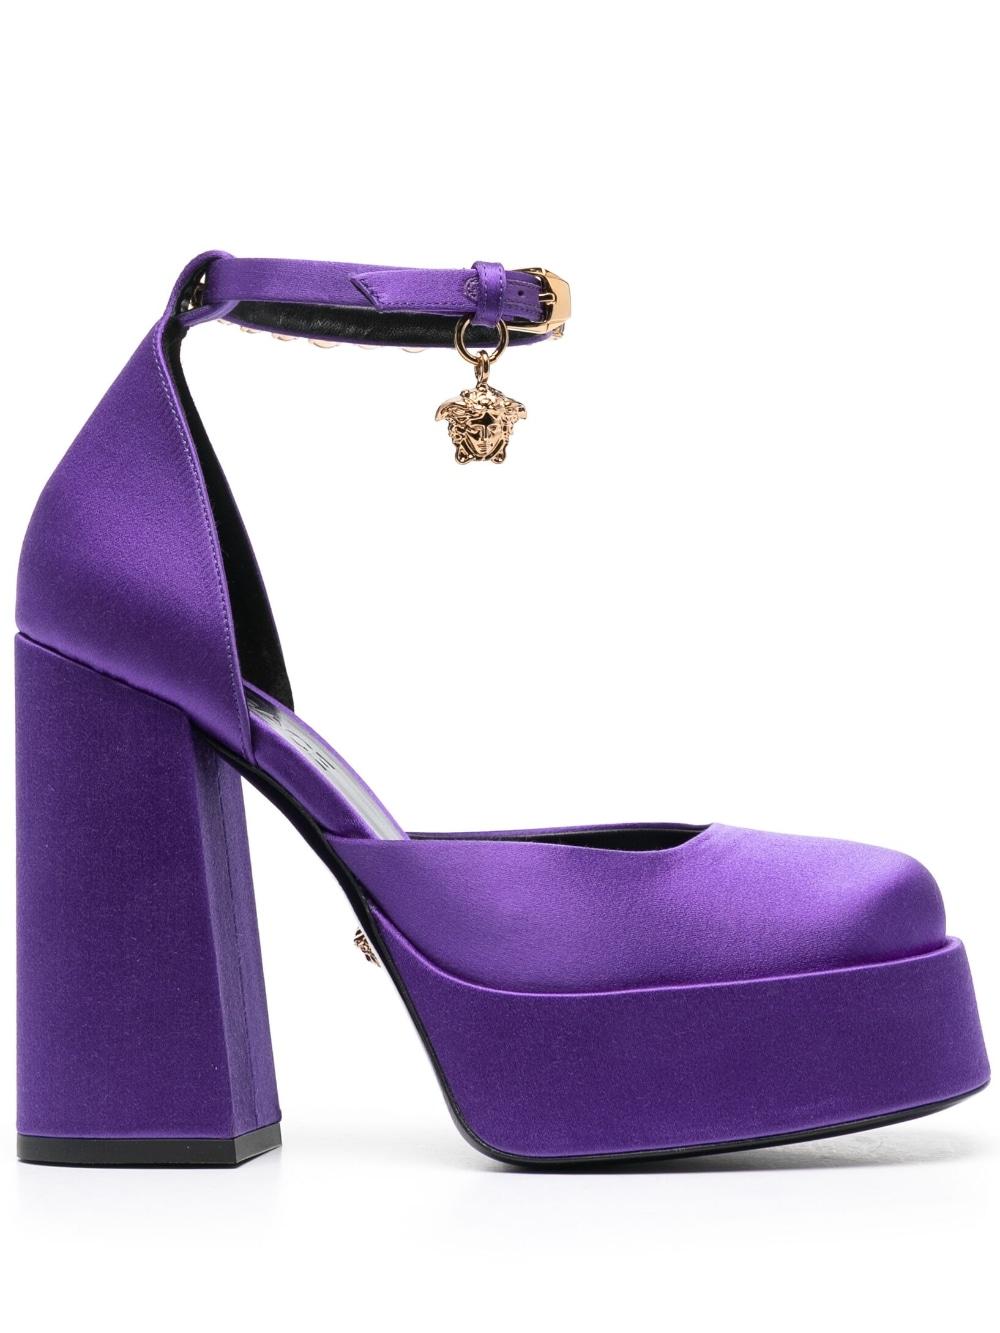 VERSACE Feminine Pink & Purple Leather Platforms for Women - SS23 Collection